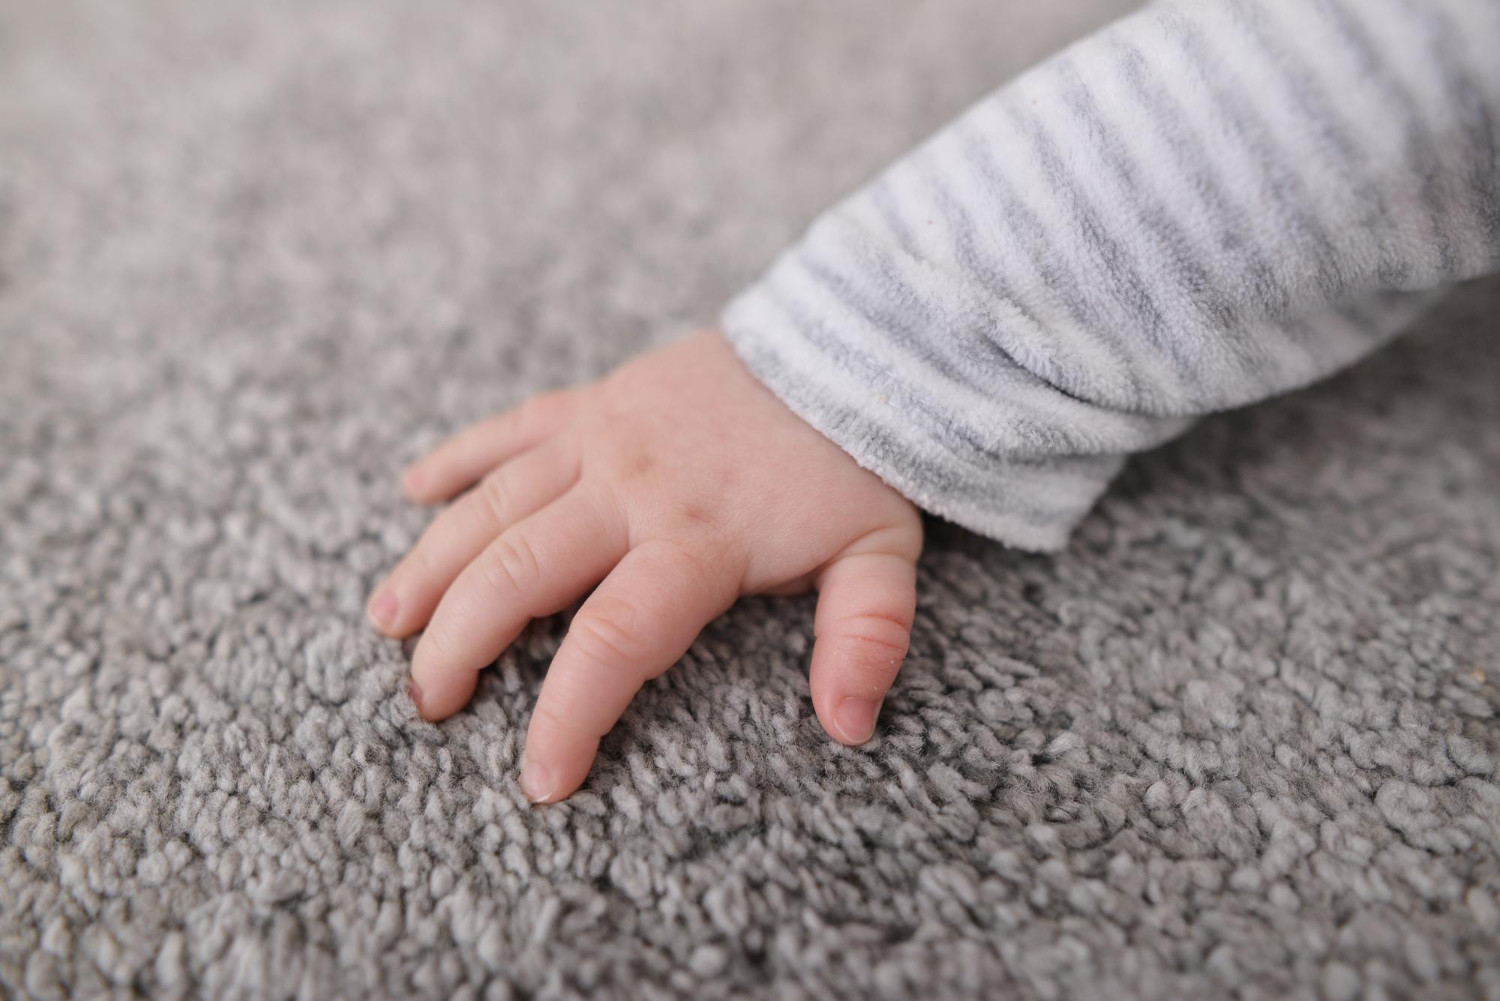 baby hand touching grey new fluffy carpet surface closeup checking softness side view